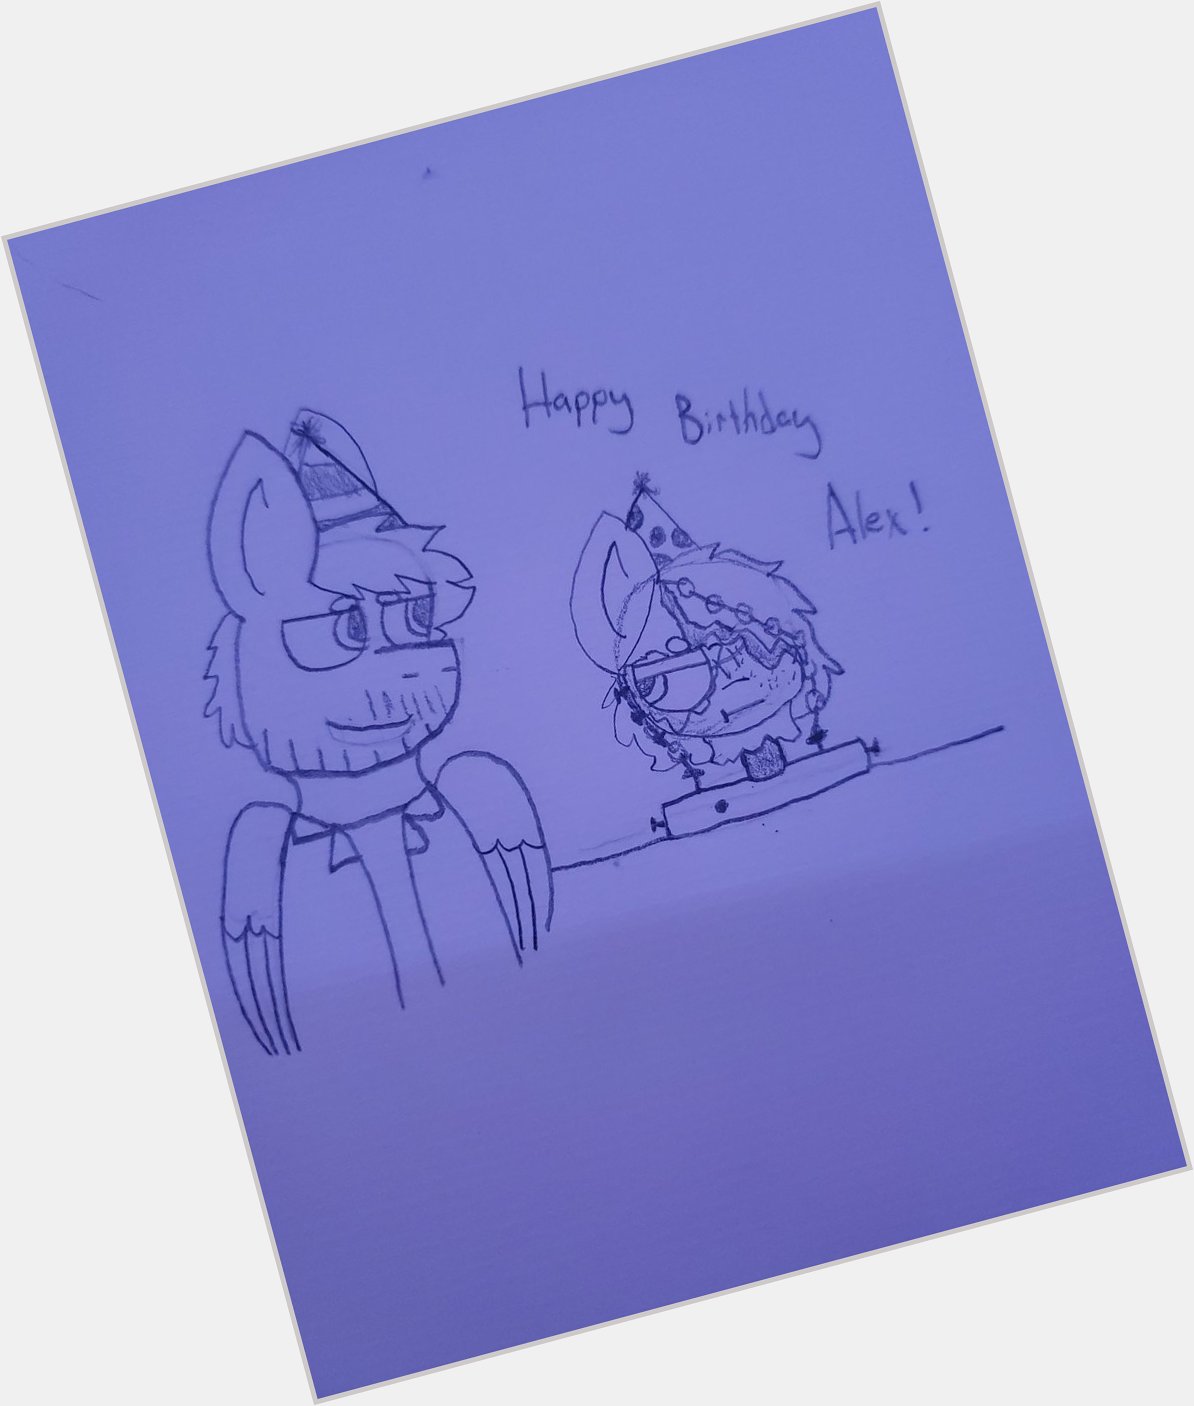  happy birthday Andy! It probably took a while to get that hat onto Chucky 